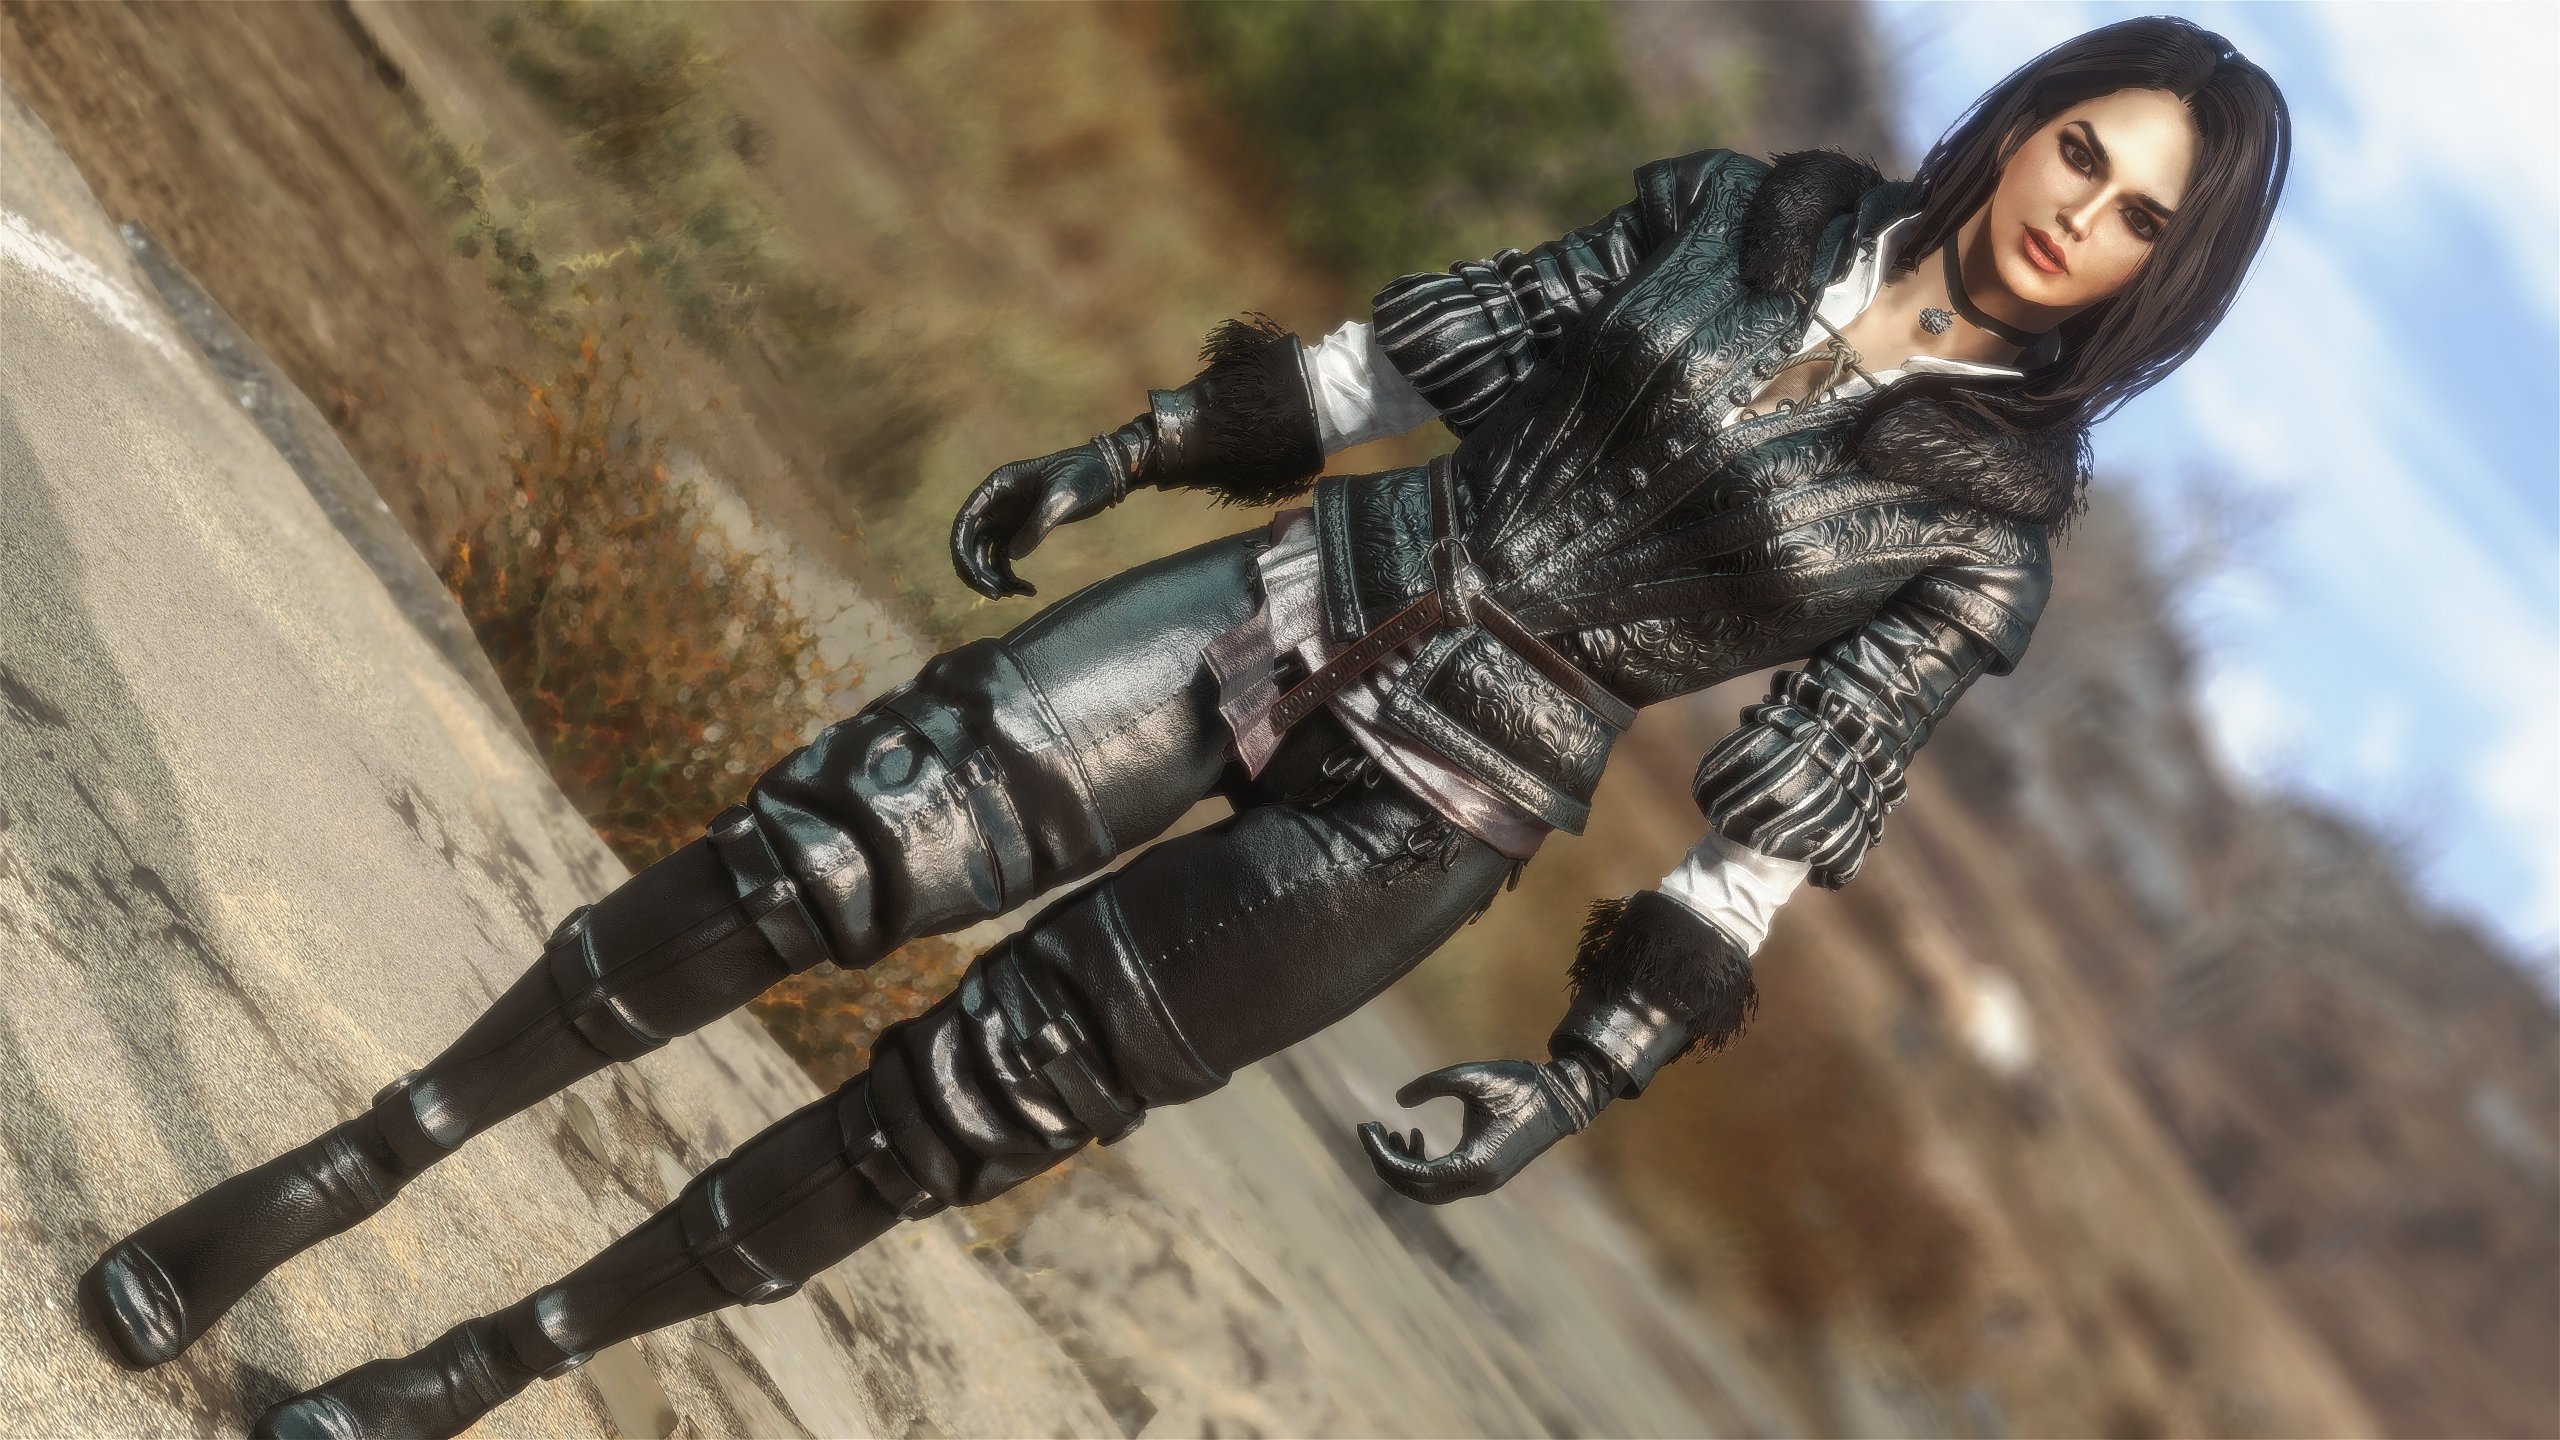 Vtaw Workshop Fallout 4 Clothing Armor Mods Fallout 4. www.loverslab.com. 